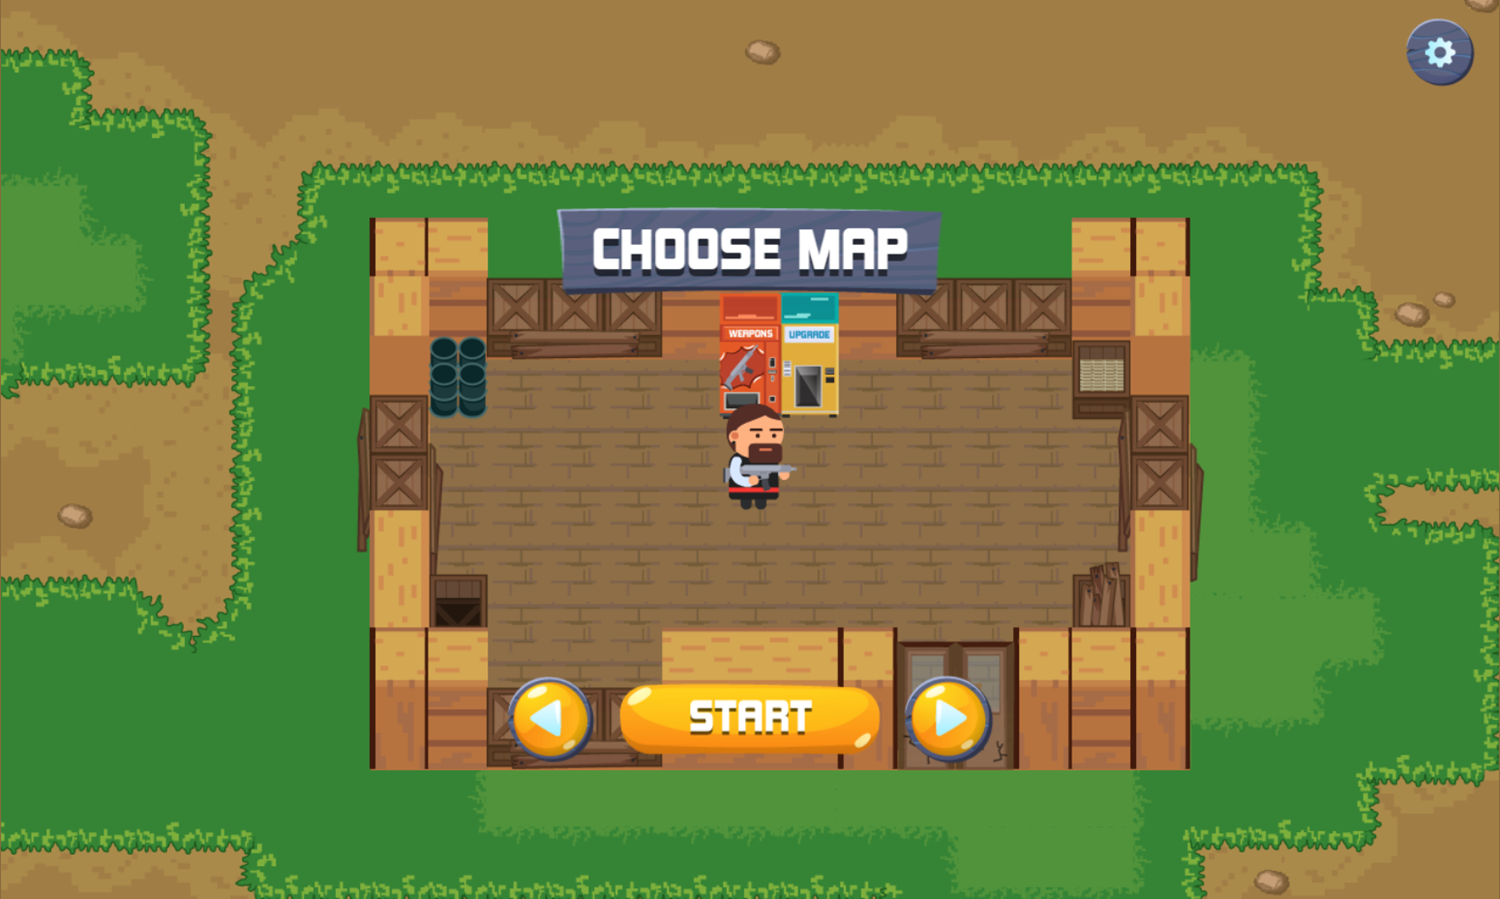 Zombie Attack Game House Map Choose Map Screen Screenshot.